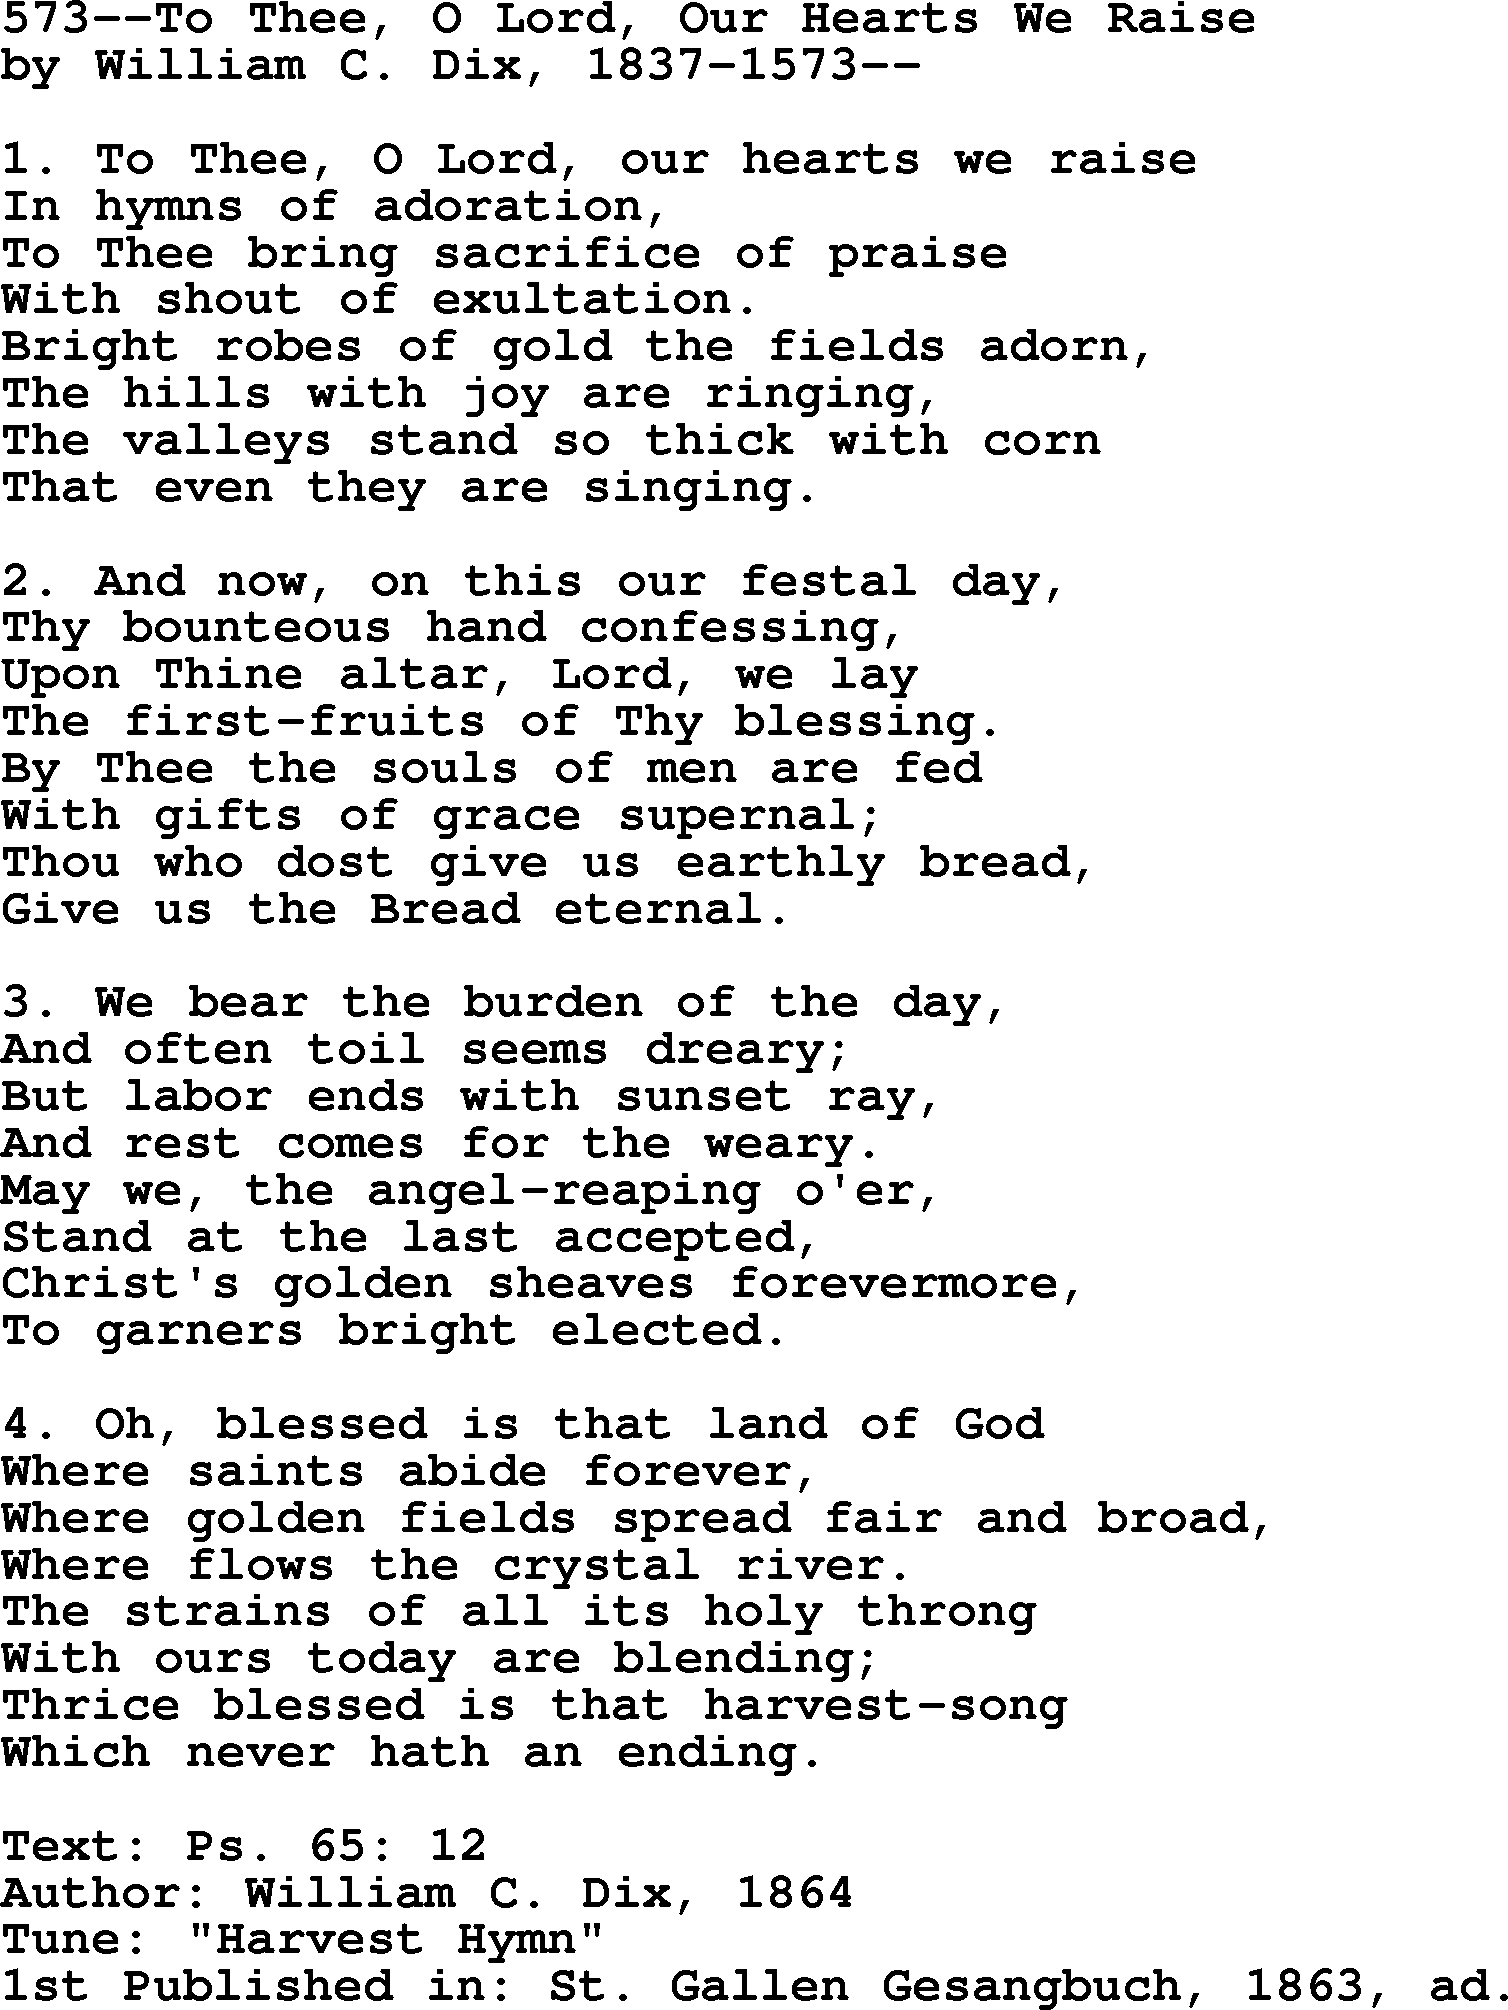 Lutheran Hymn: 573--To Thee, O Lord, Our Hearts We Raise.txt lyrics with PDF